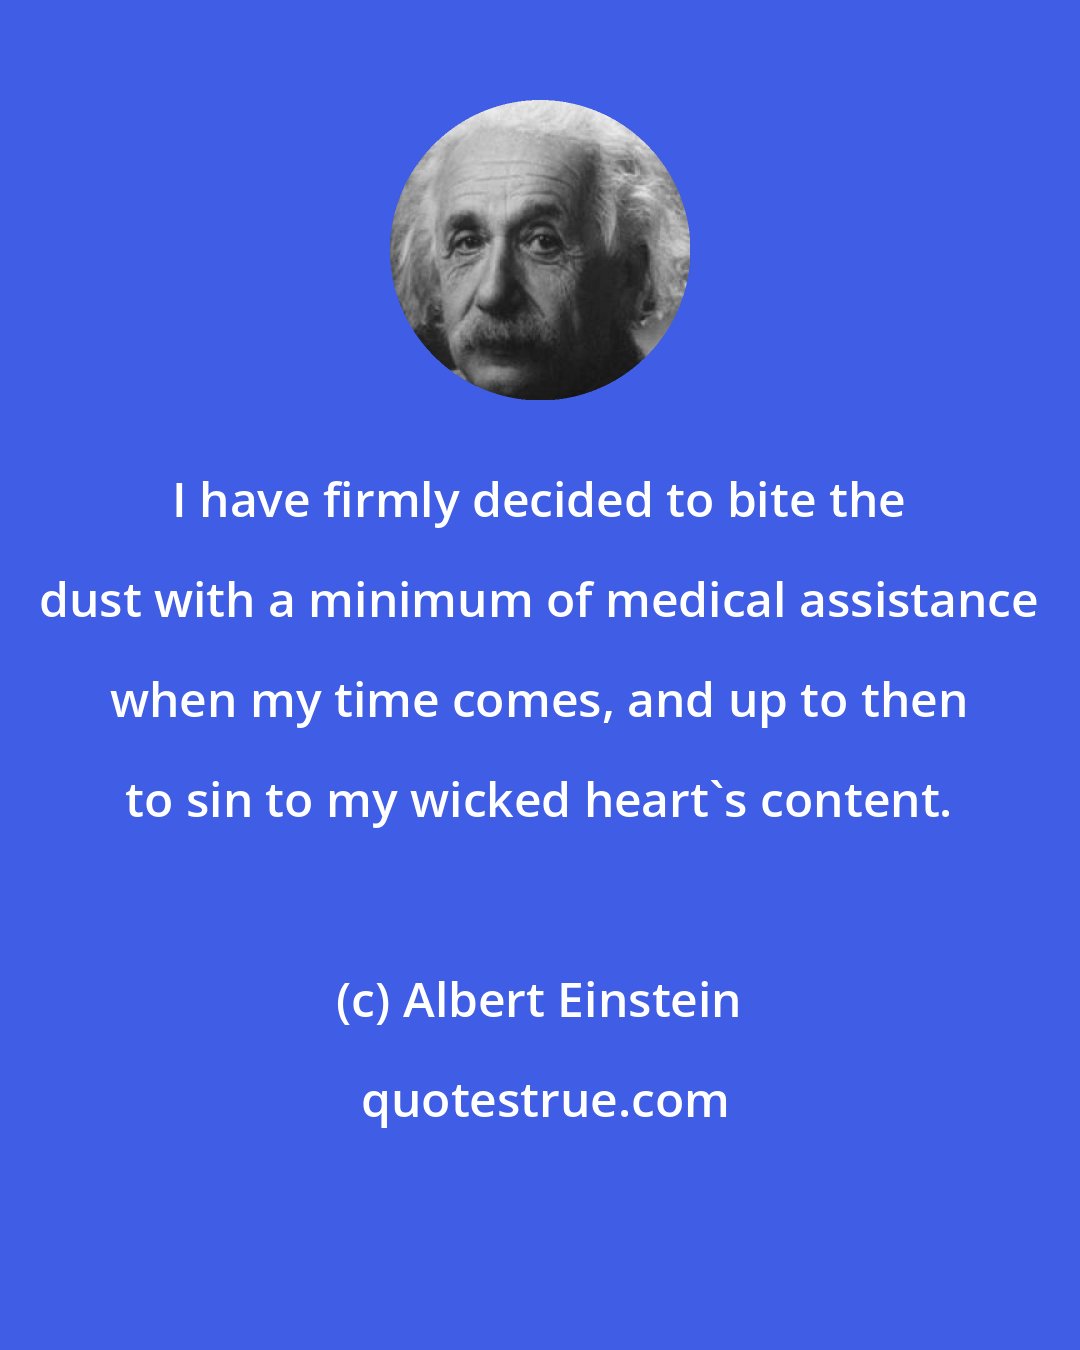 Albert Einstein: I have firmly decided to bite the dust with a minimum of medical assistance when my time comes, and up to then to sin to my wicked heart's content.